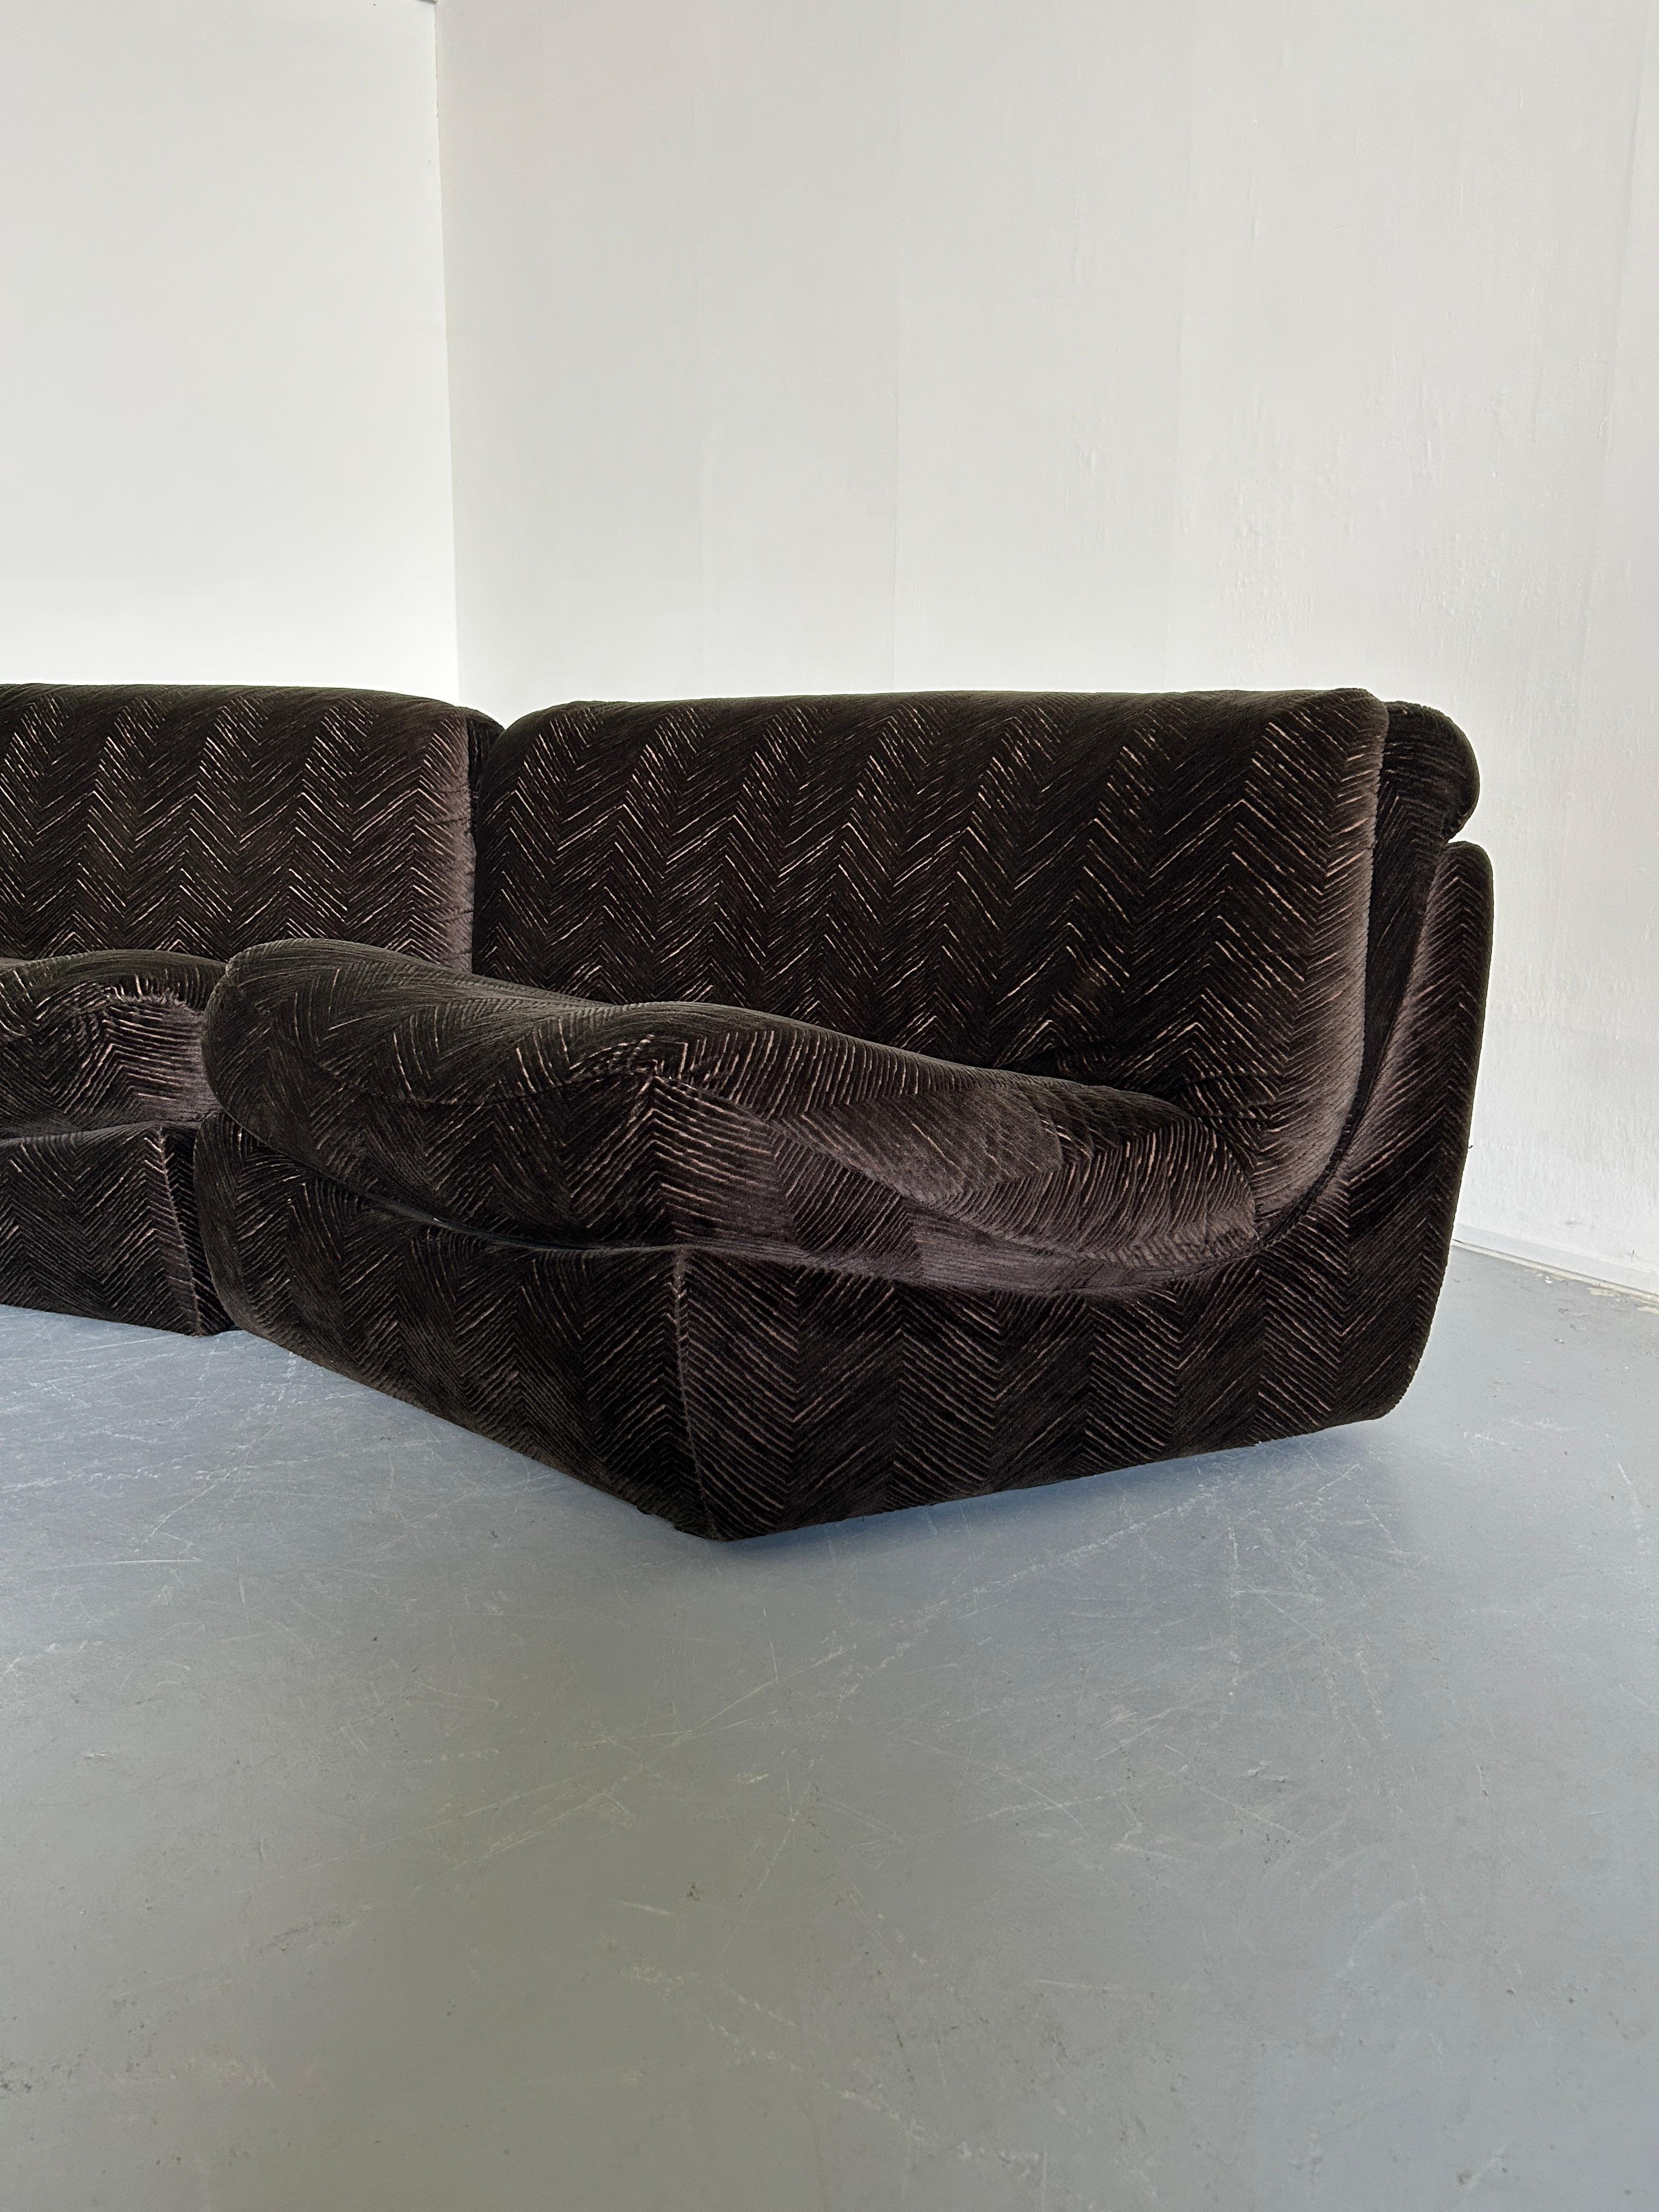 Vintage Mid-Century Modern Curved Modular Sofa attributed to Wittmann, 70s  For Sale 5